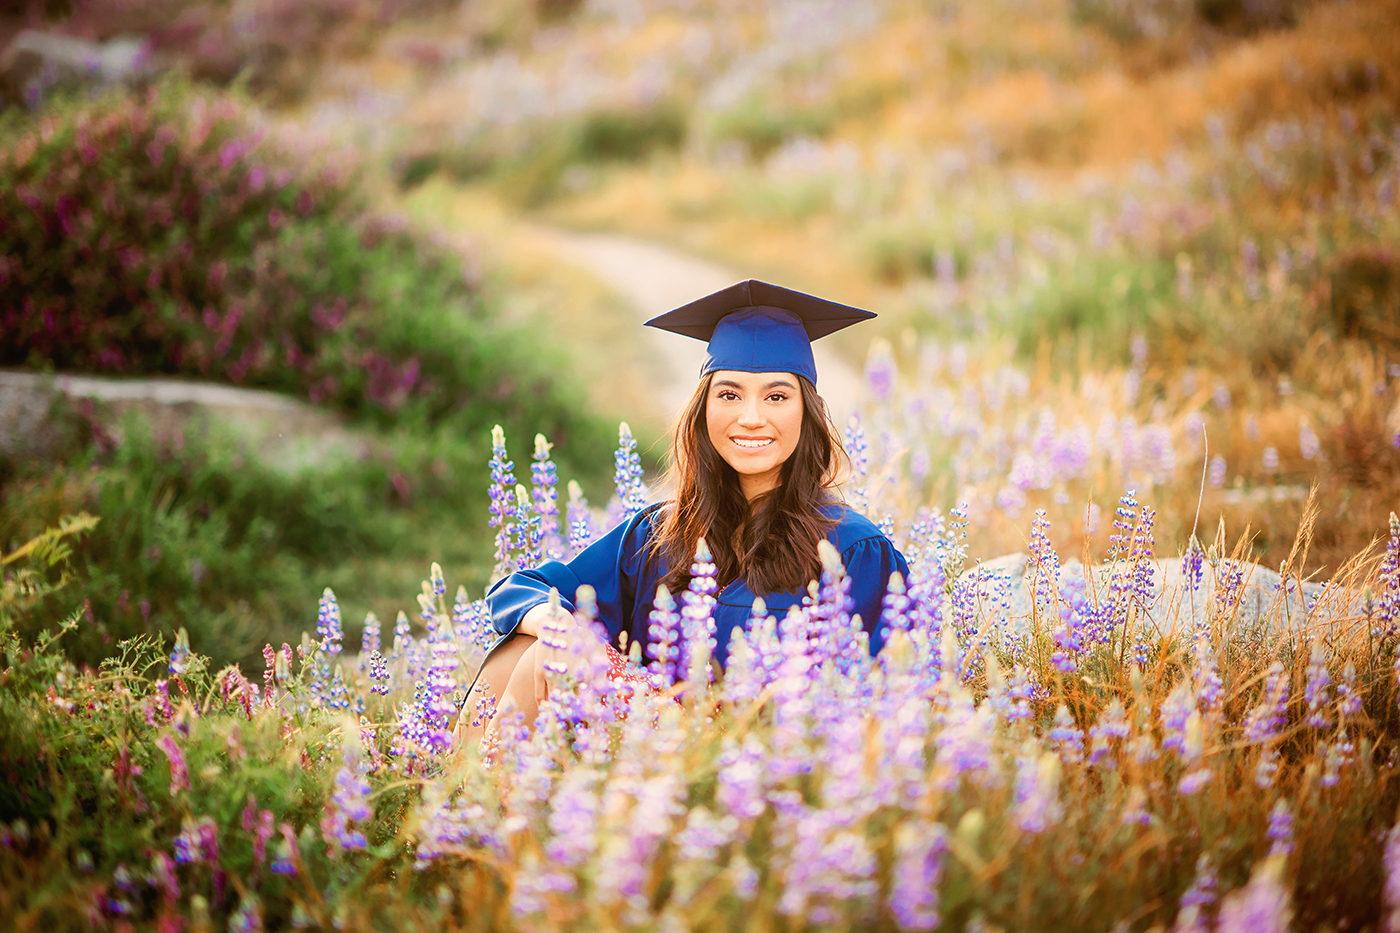 graduation photos in the flowers